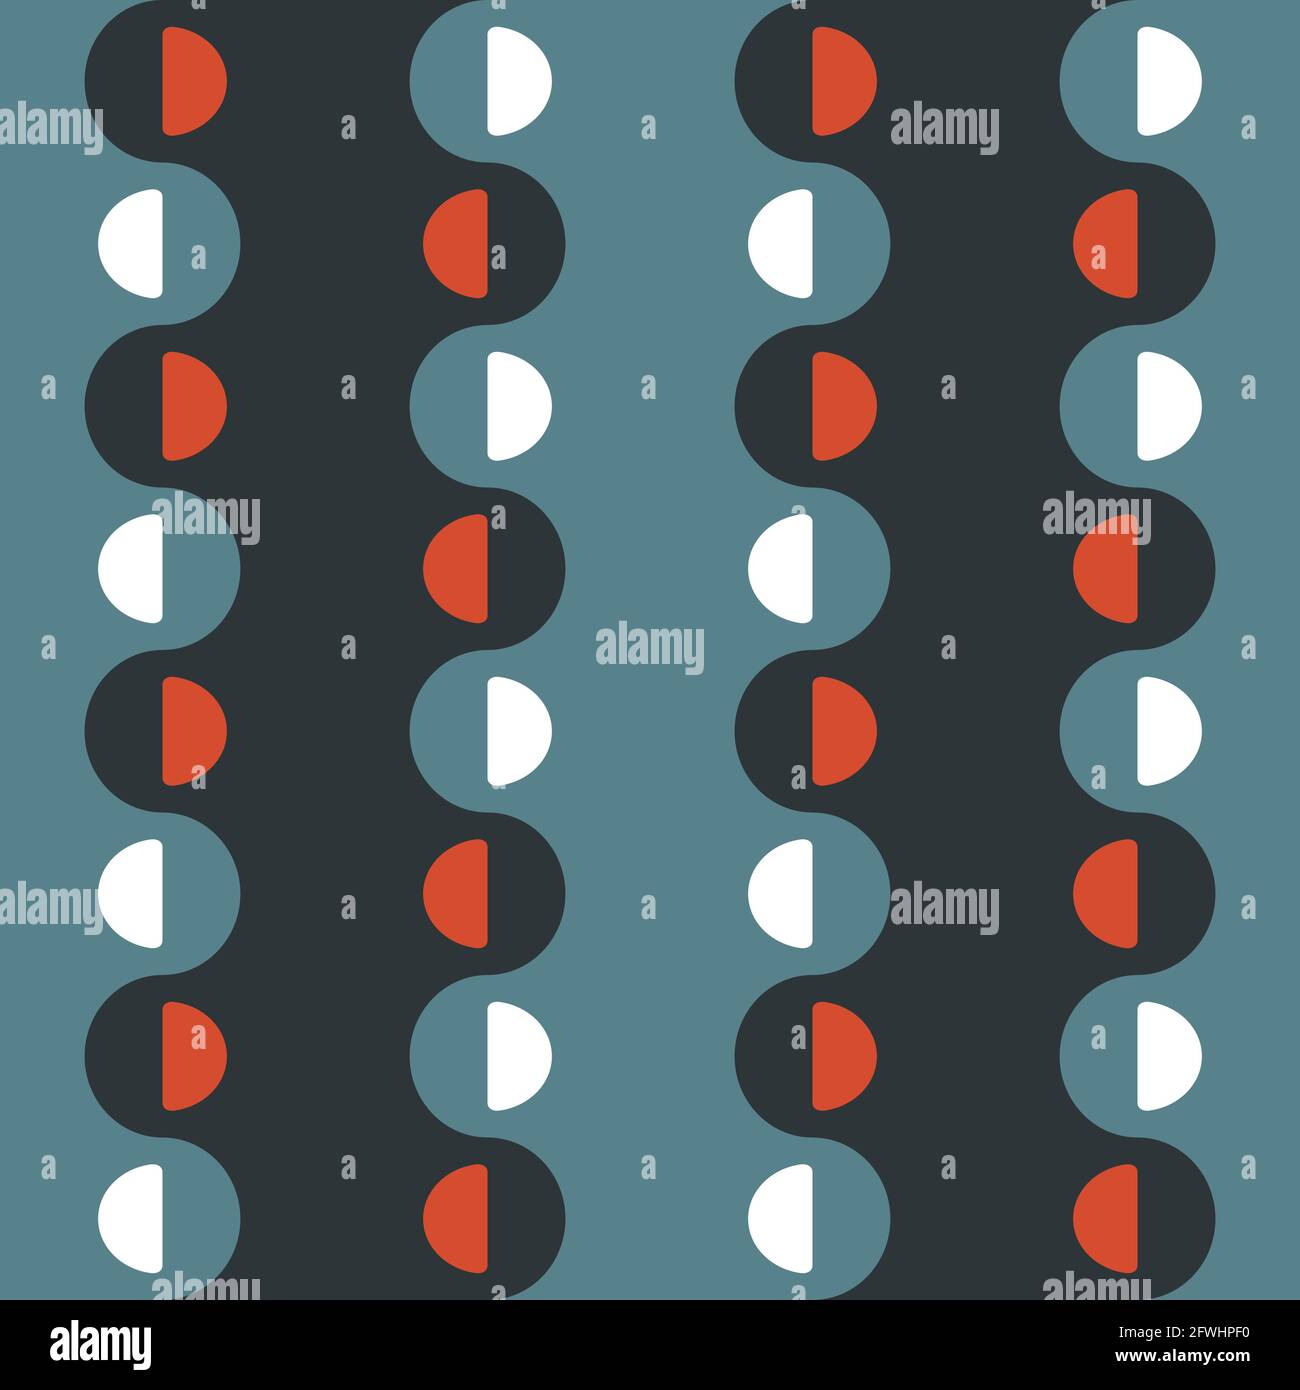 Simple retro seamless pattern for web, advertising, textiles, prints and any design projects. Rounded shapes will decorate any surface or thing and ma Stock Vector